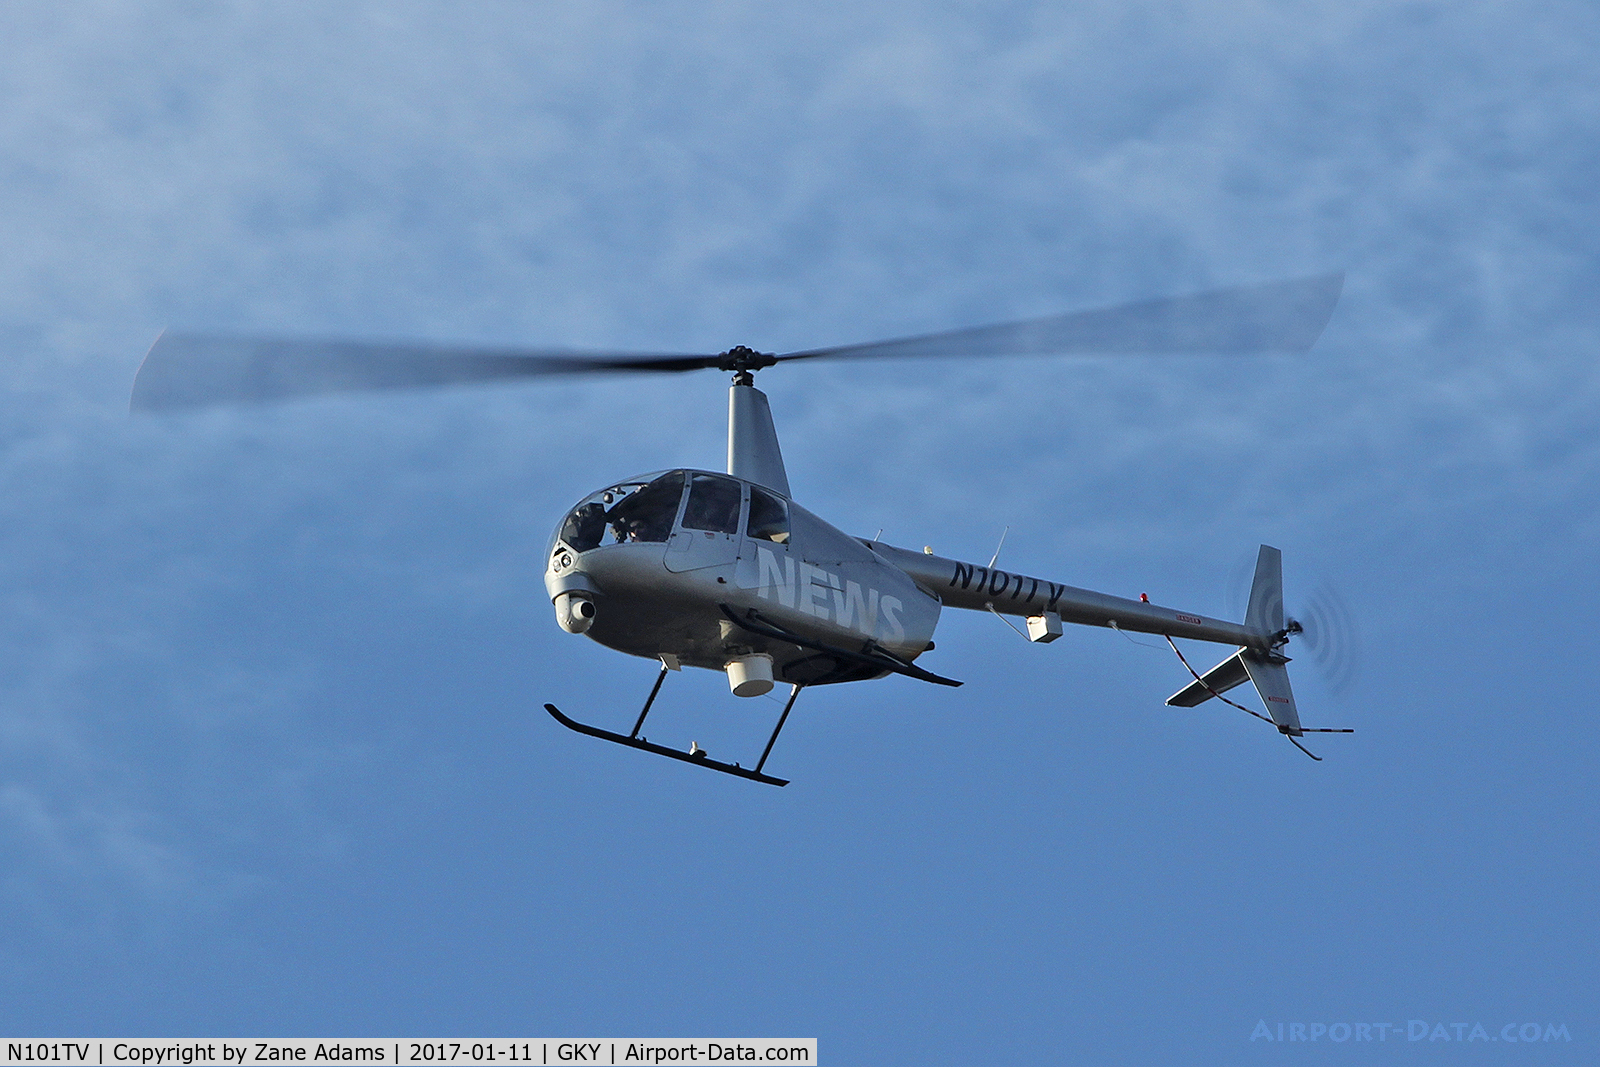 N101TV, 1998 Robinson R44 C/N 0475, TV news helicopter covering police manhunt over Kennedale, TX